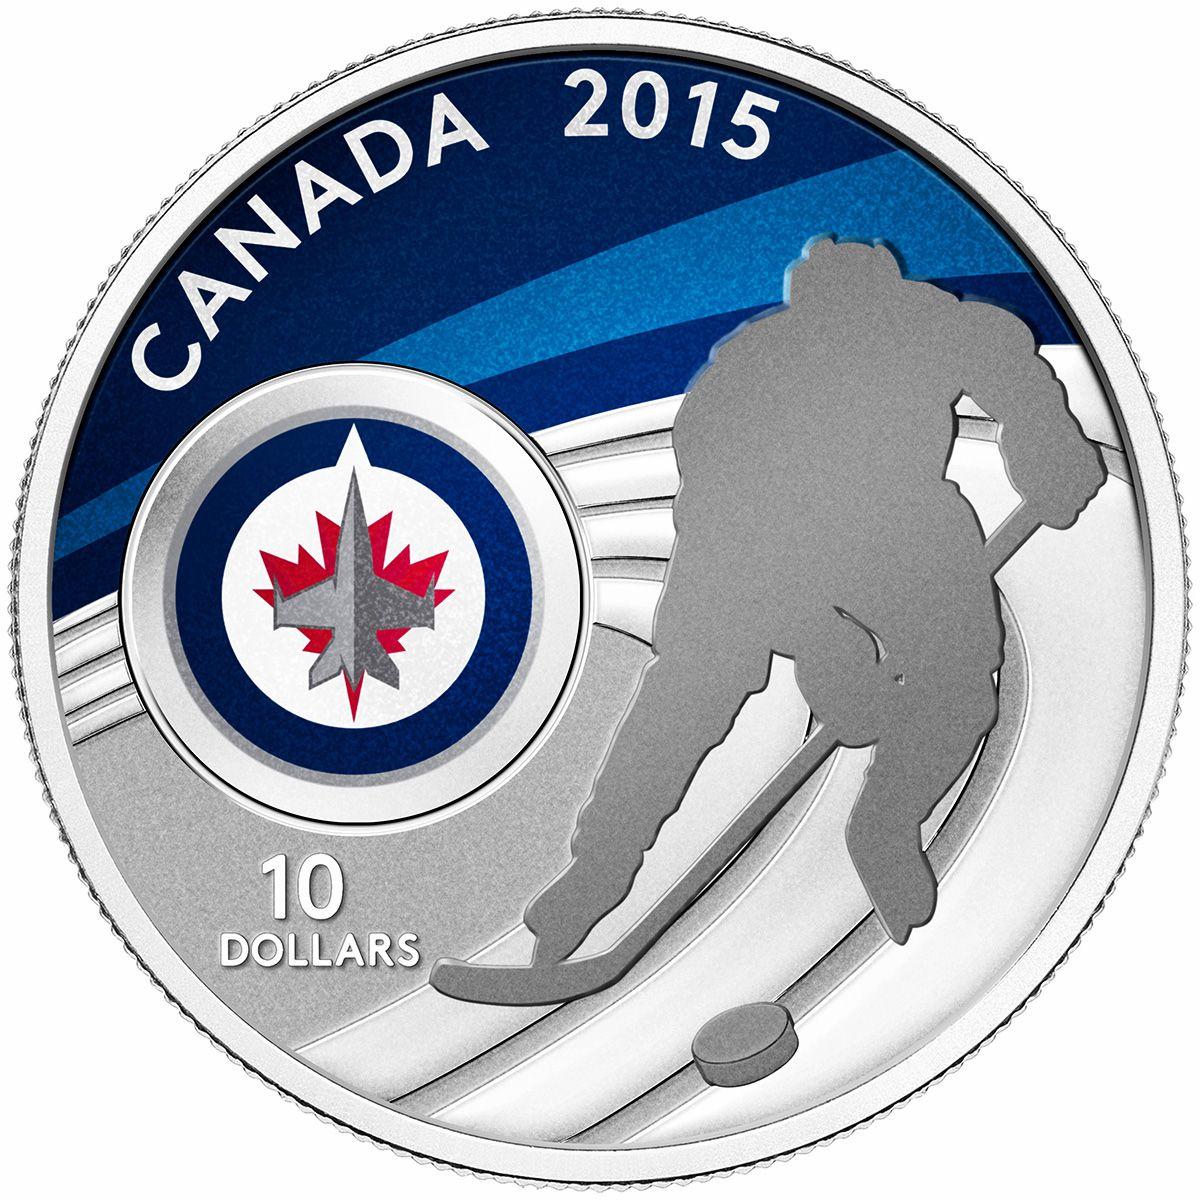 NHL Jets Logo - $10 Fine Silver Coin Jets. Royal Canadian Mint Coins